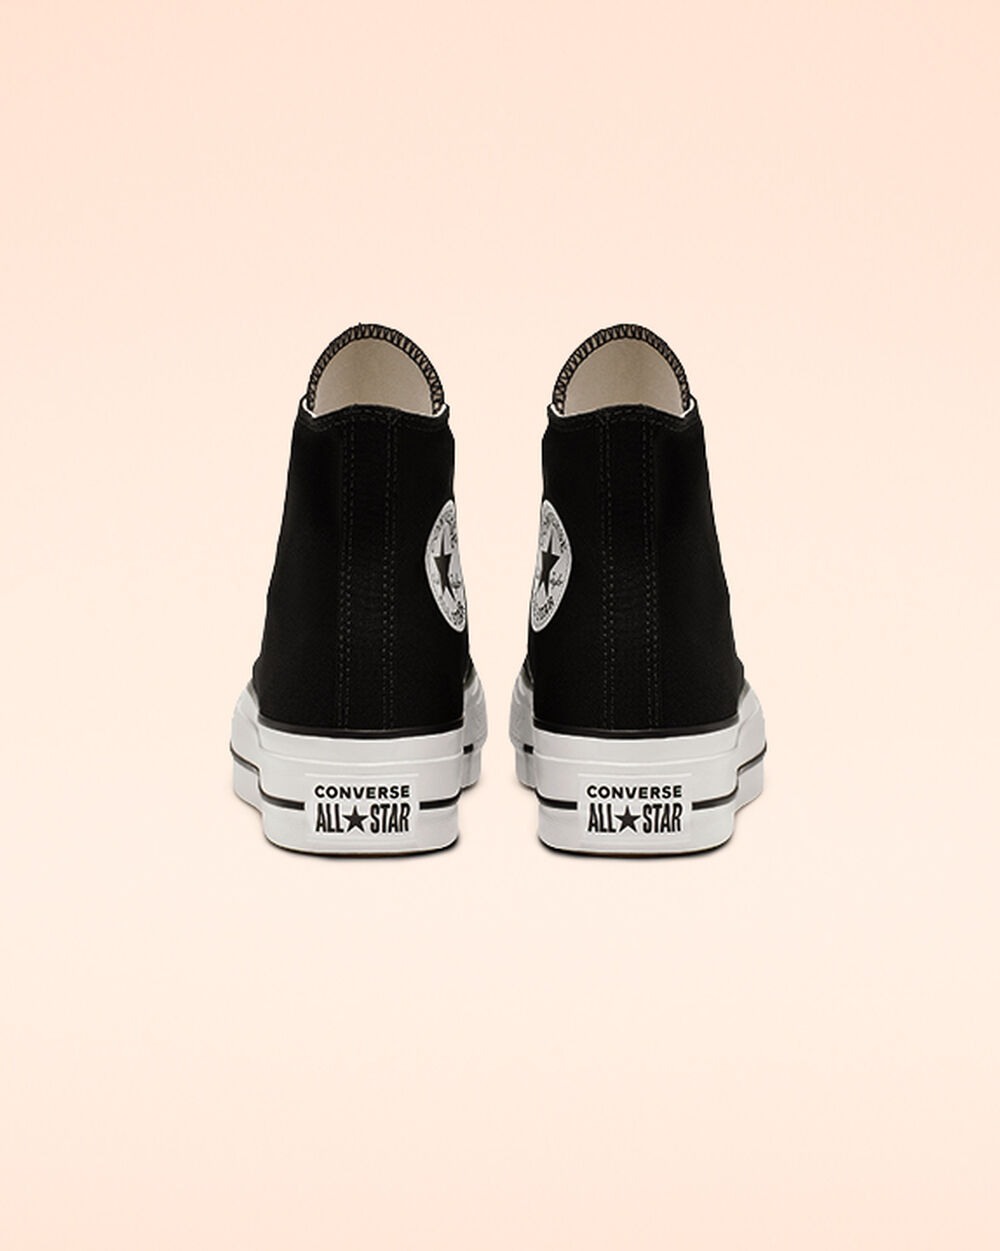 Tenis Converse Chuck Taylor All Star Mujer Negros Blancos | Mexico-213466